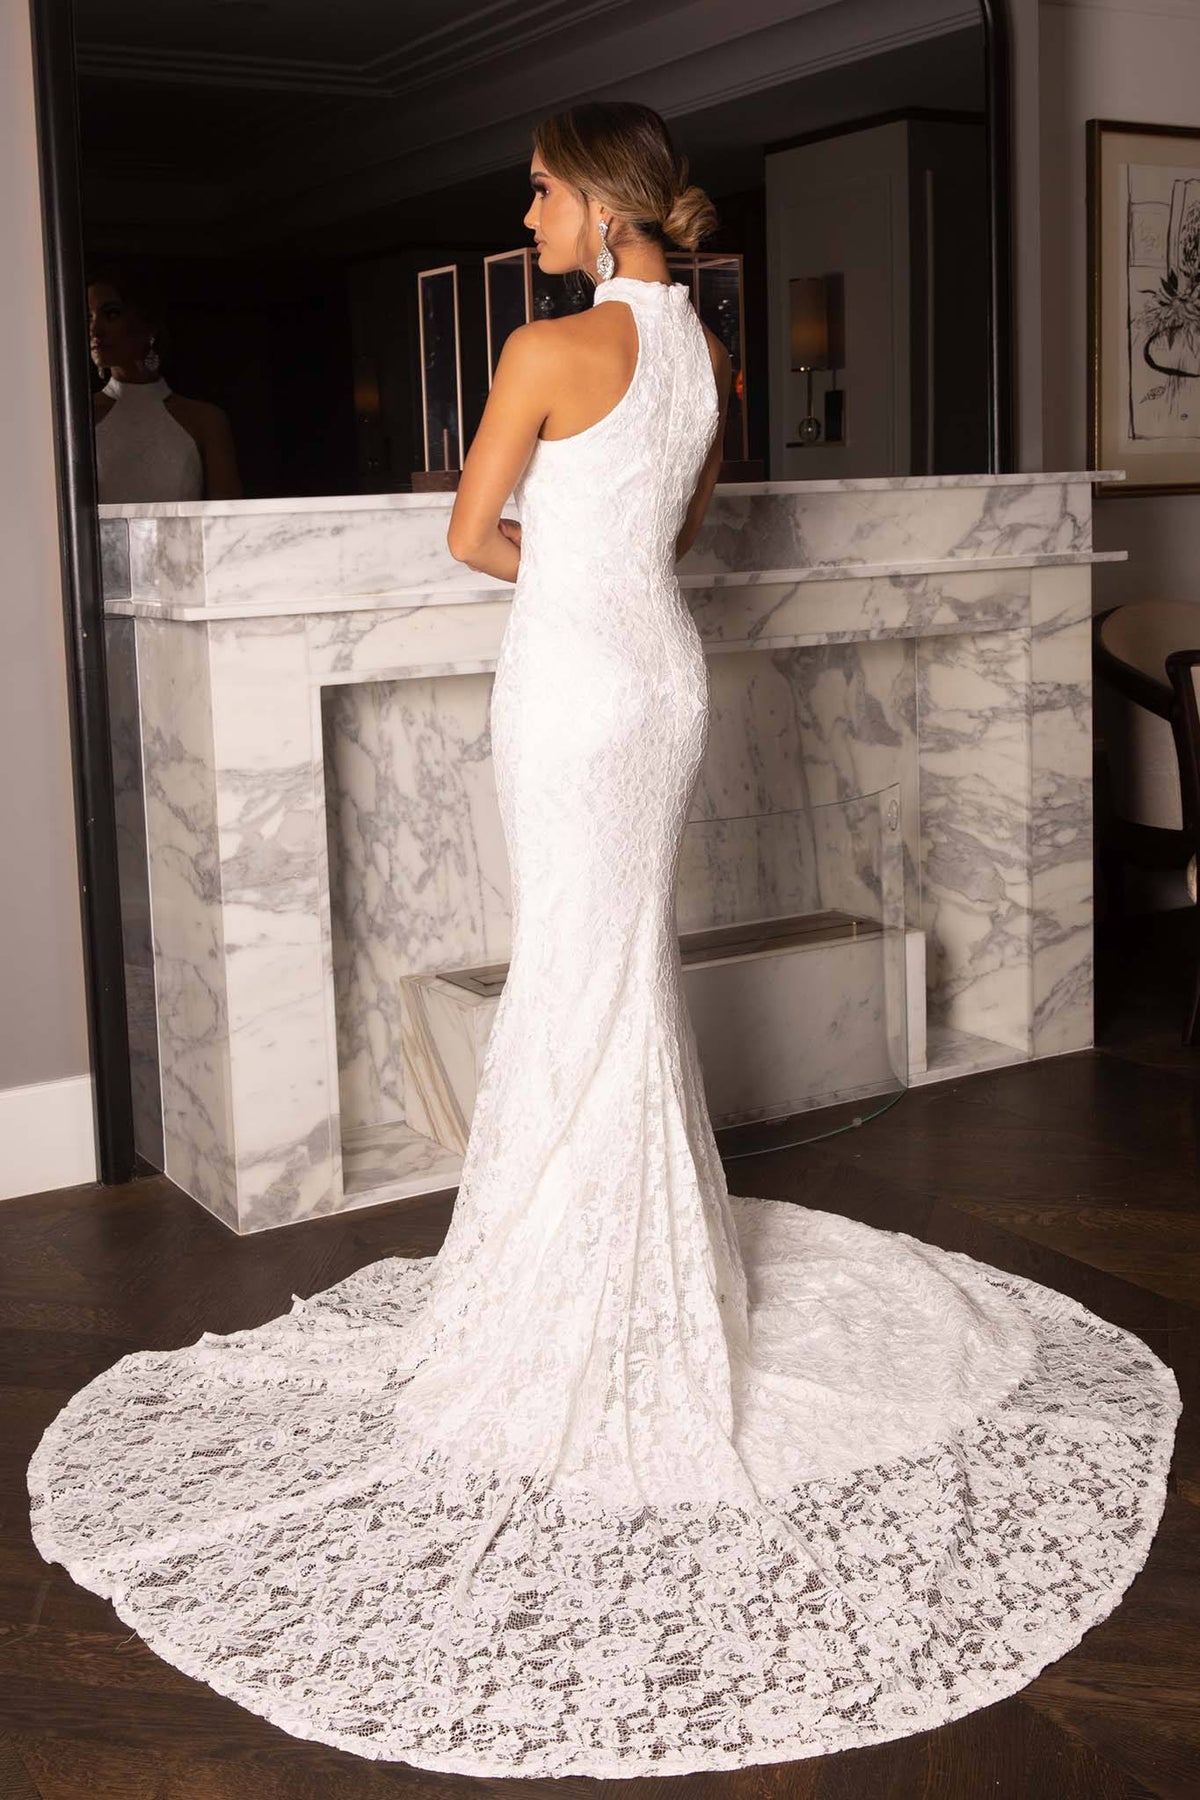 White Lace Bridal Gown with High Neckline, Fit & Flare Trumpet Silhouette and Floor Sweeping Train